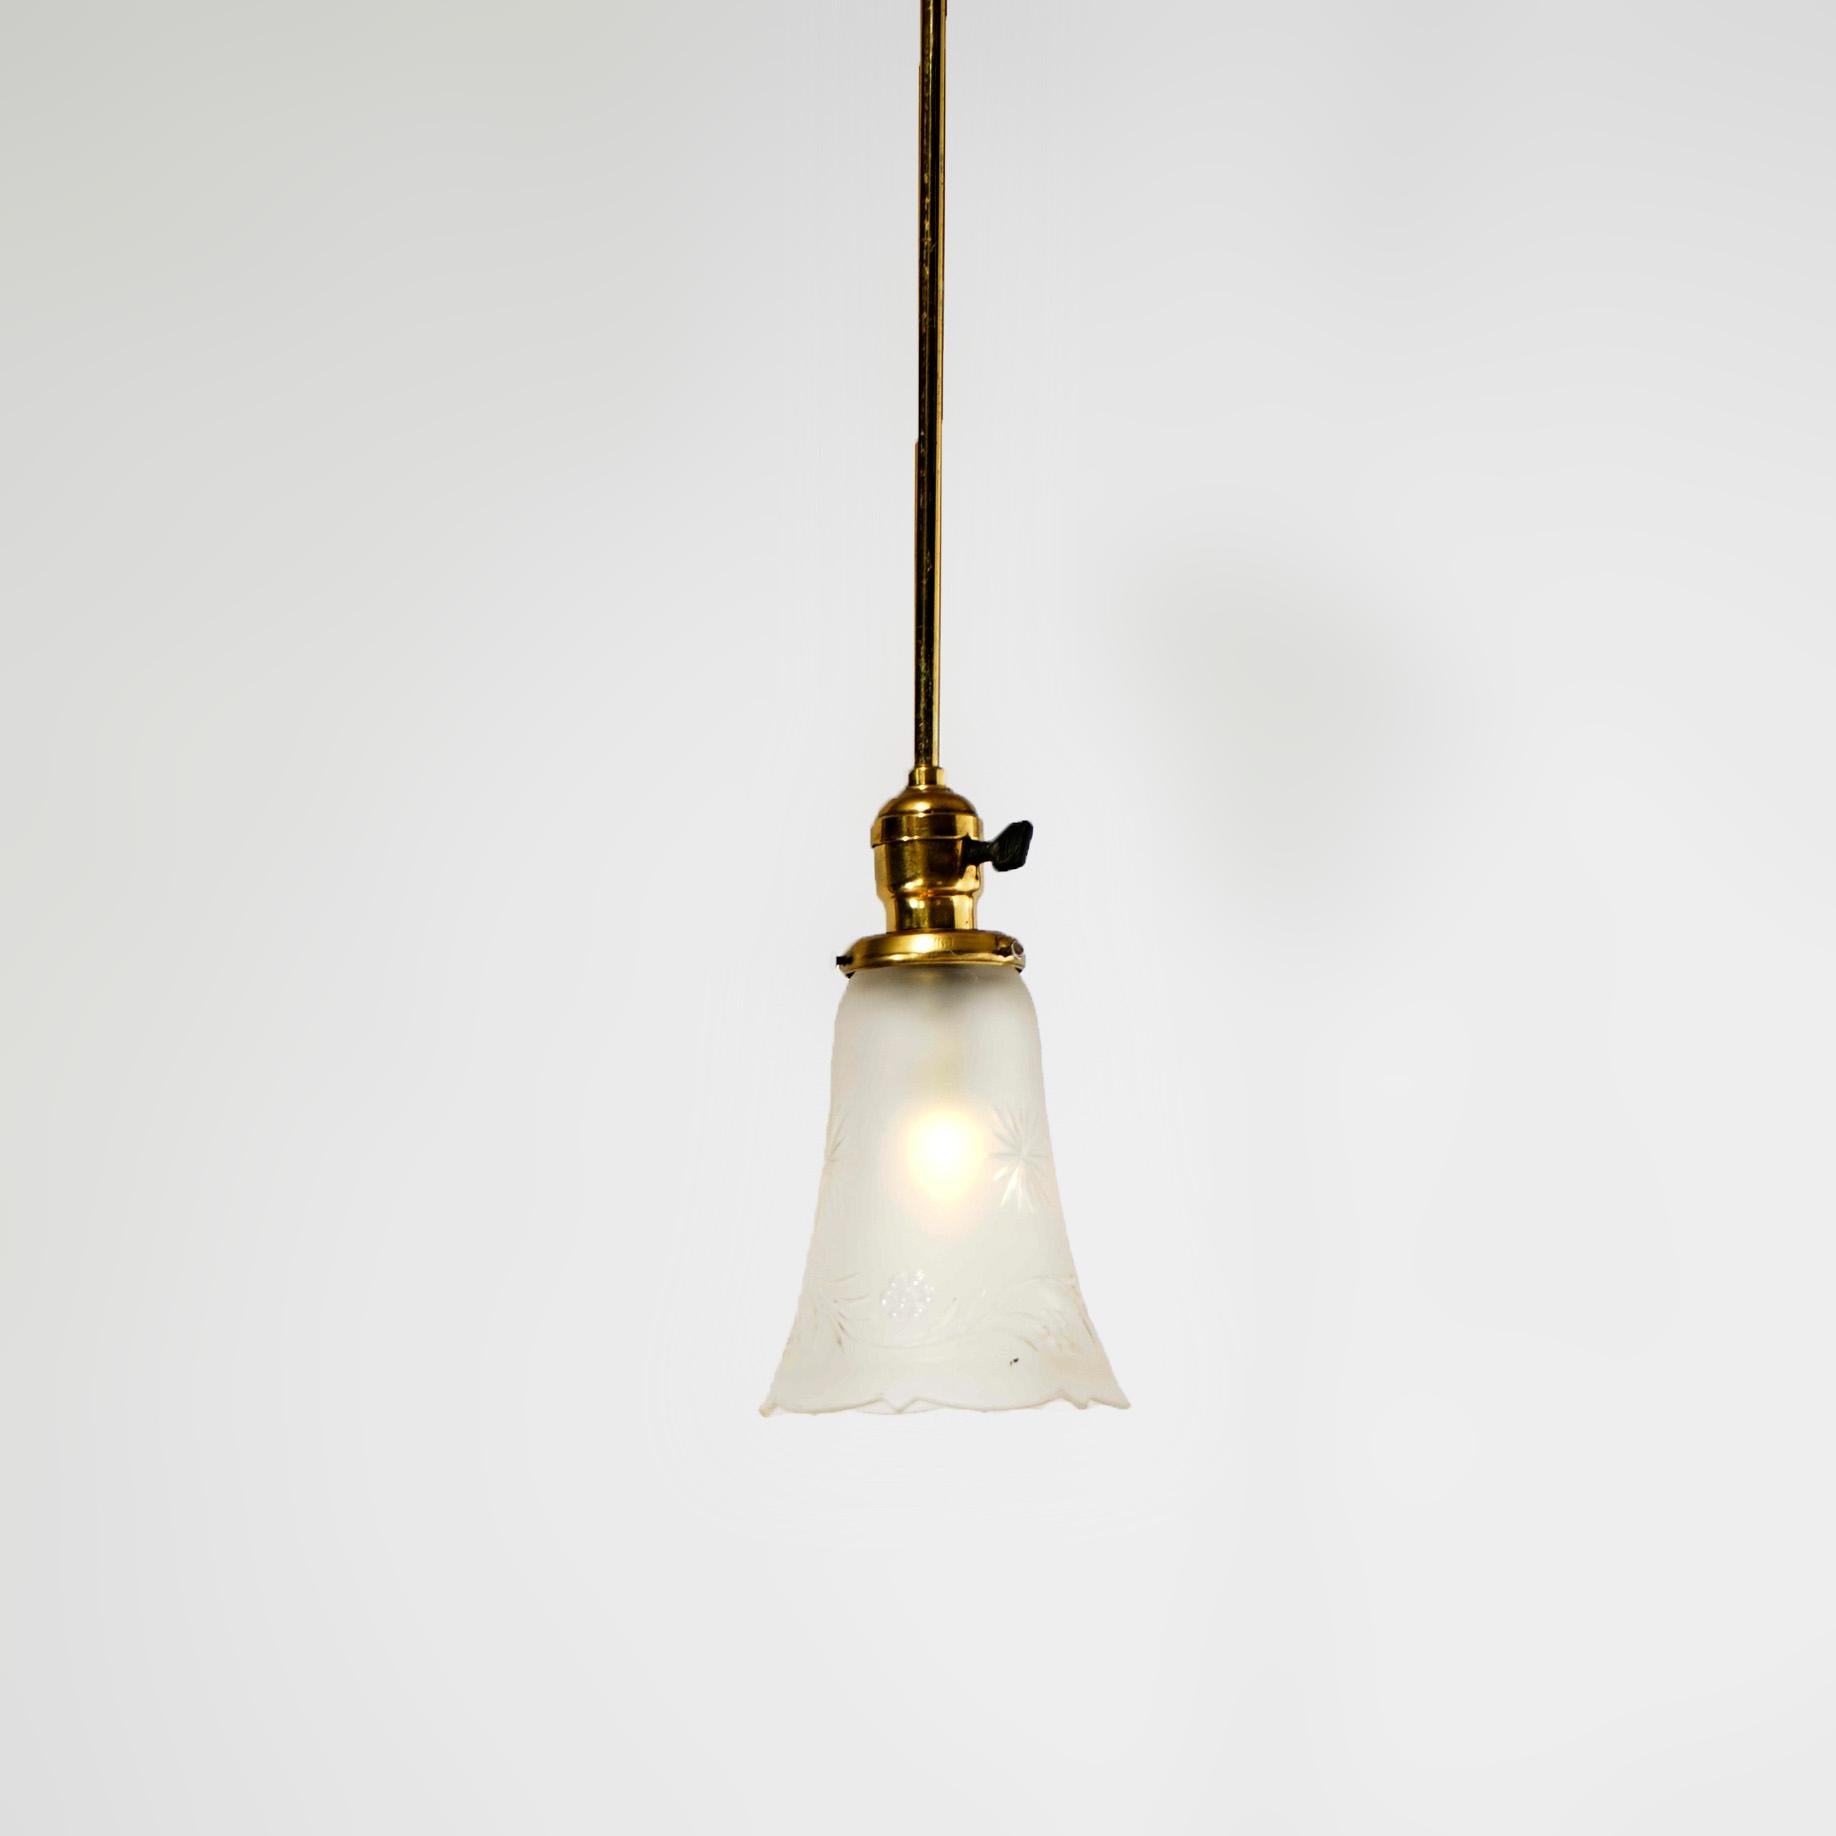 Antique Brass Hanging Hall Light Fixture Circa 1920 In Good Condition For Sale In Big Flats, NY